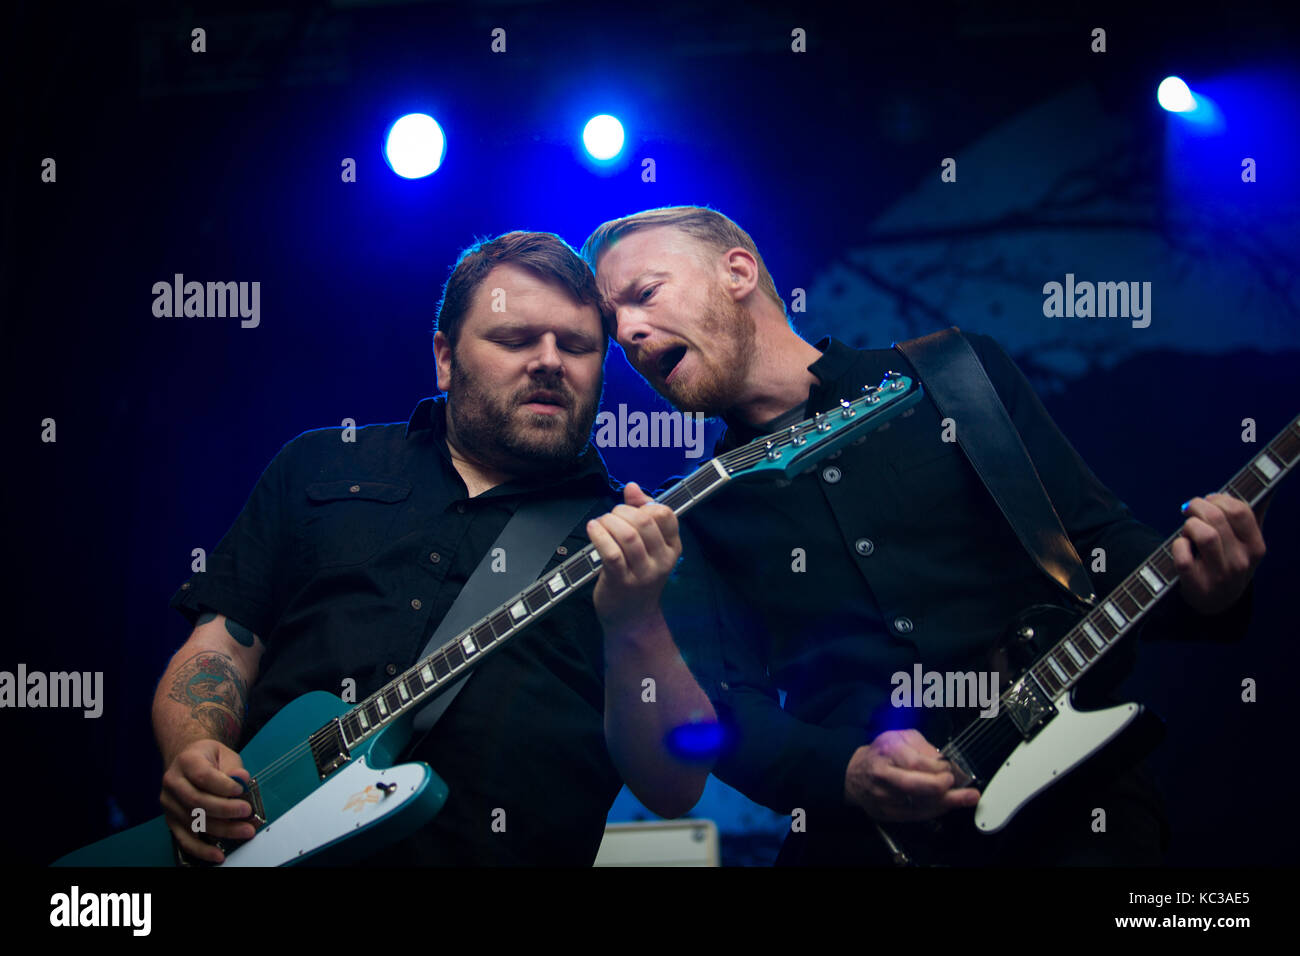 The Norwegian hard rock band Skambankt performs a live concert at the Norwegian music festival Bergenfest 2014. Here vocalist and guitarist Terje Winterstø Røthing is pictured live on stage with guitarist Hanz Panzer. Norway, 11/06 2014. Stock Photo